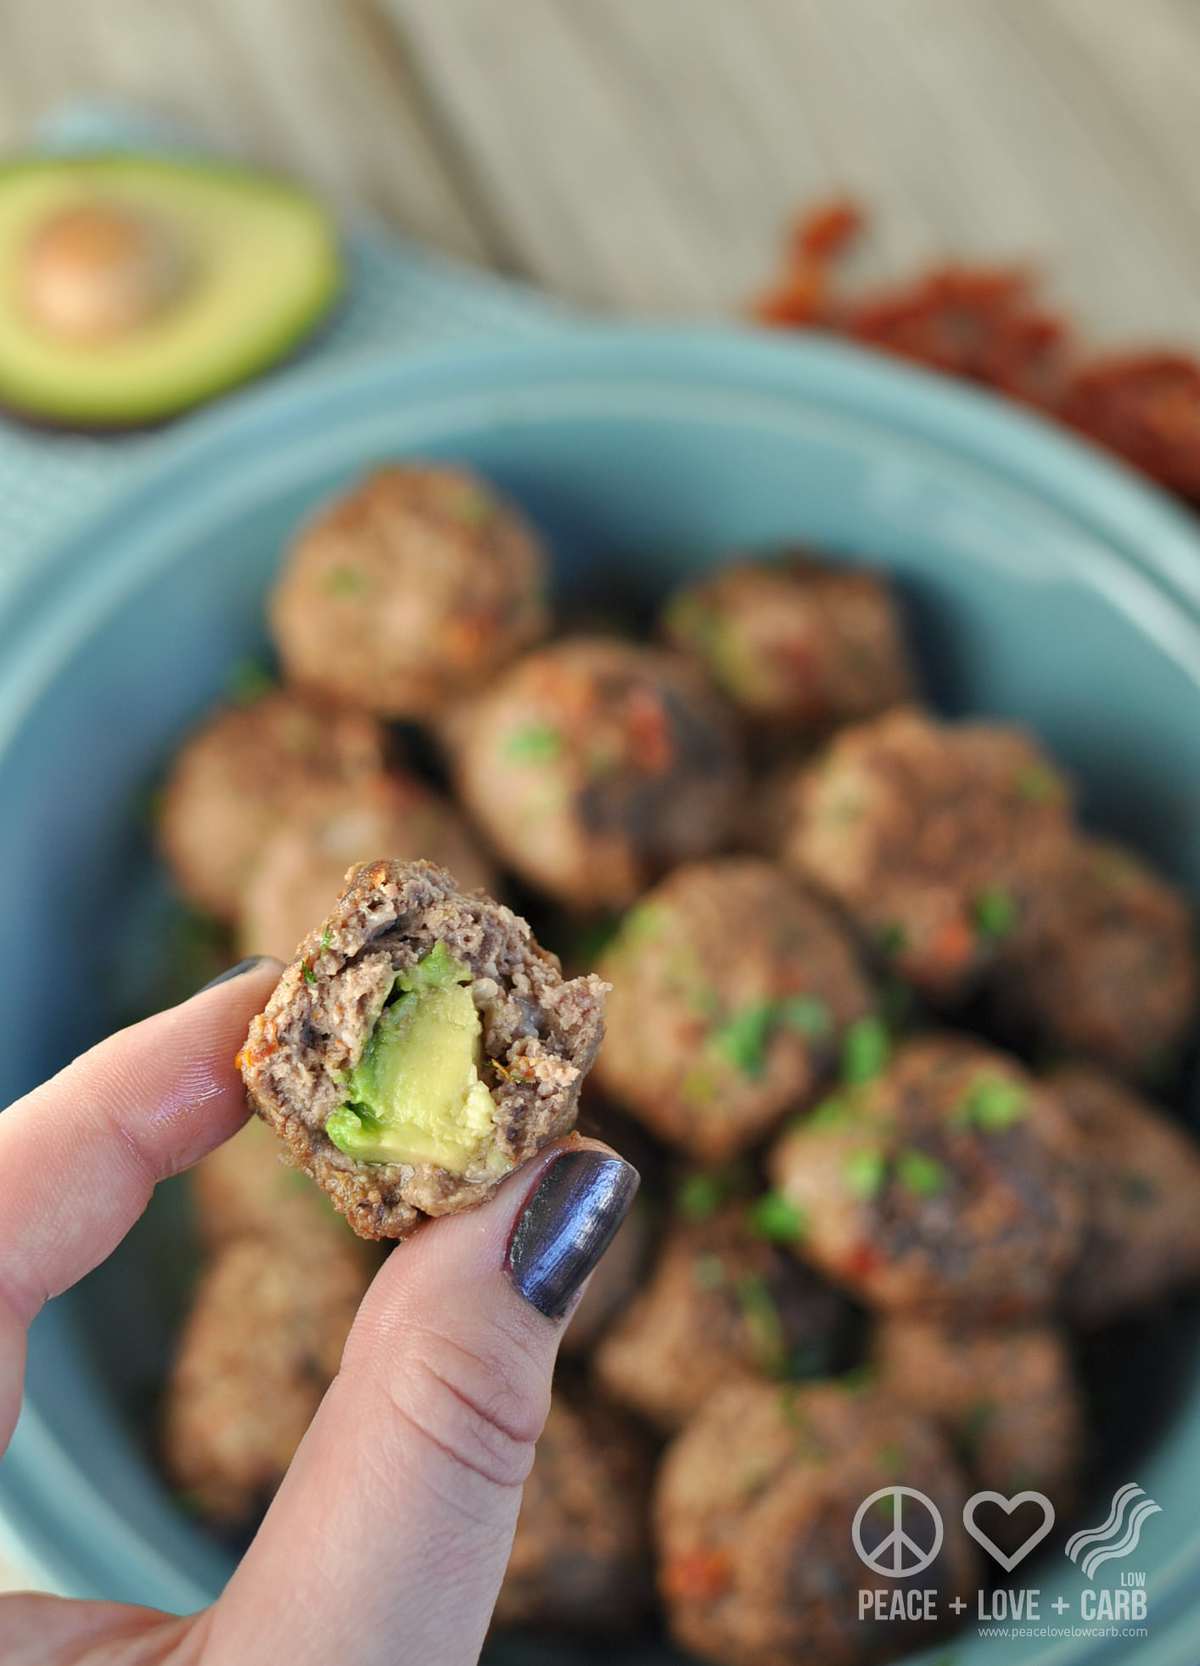 White Cheddar and Sun Dried Tomato Avocado Stuffed Meatballs - Low Carb, Gluten Free | Peace Love and Low Carb